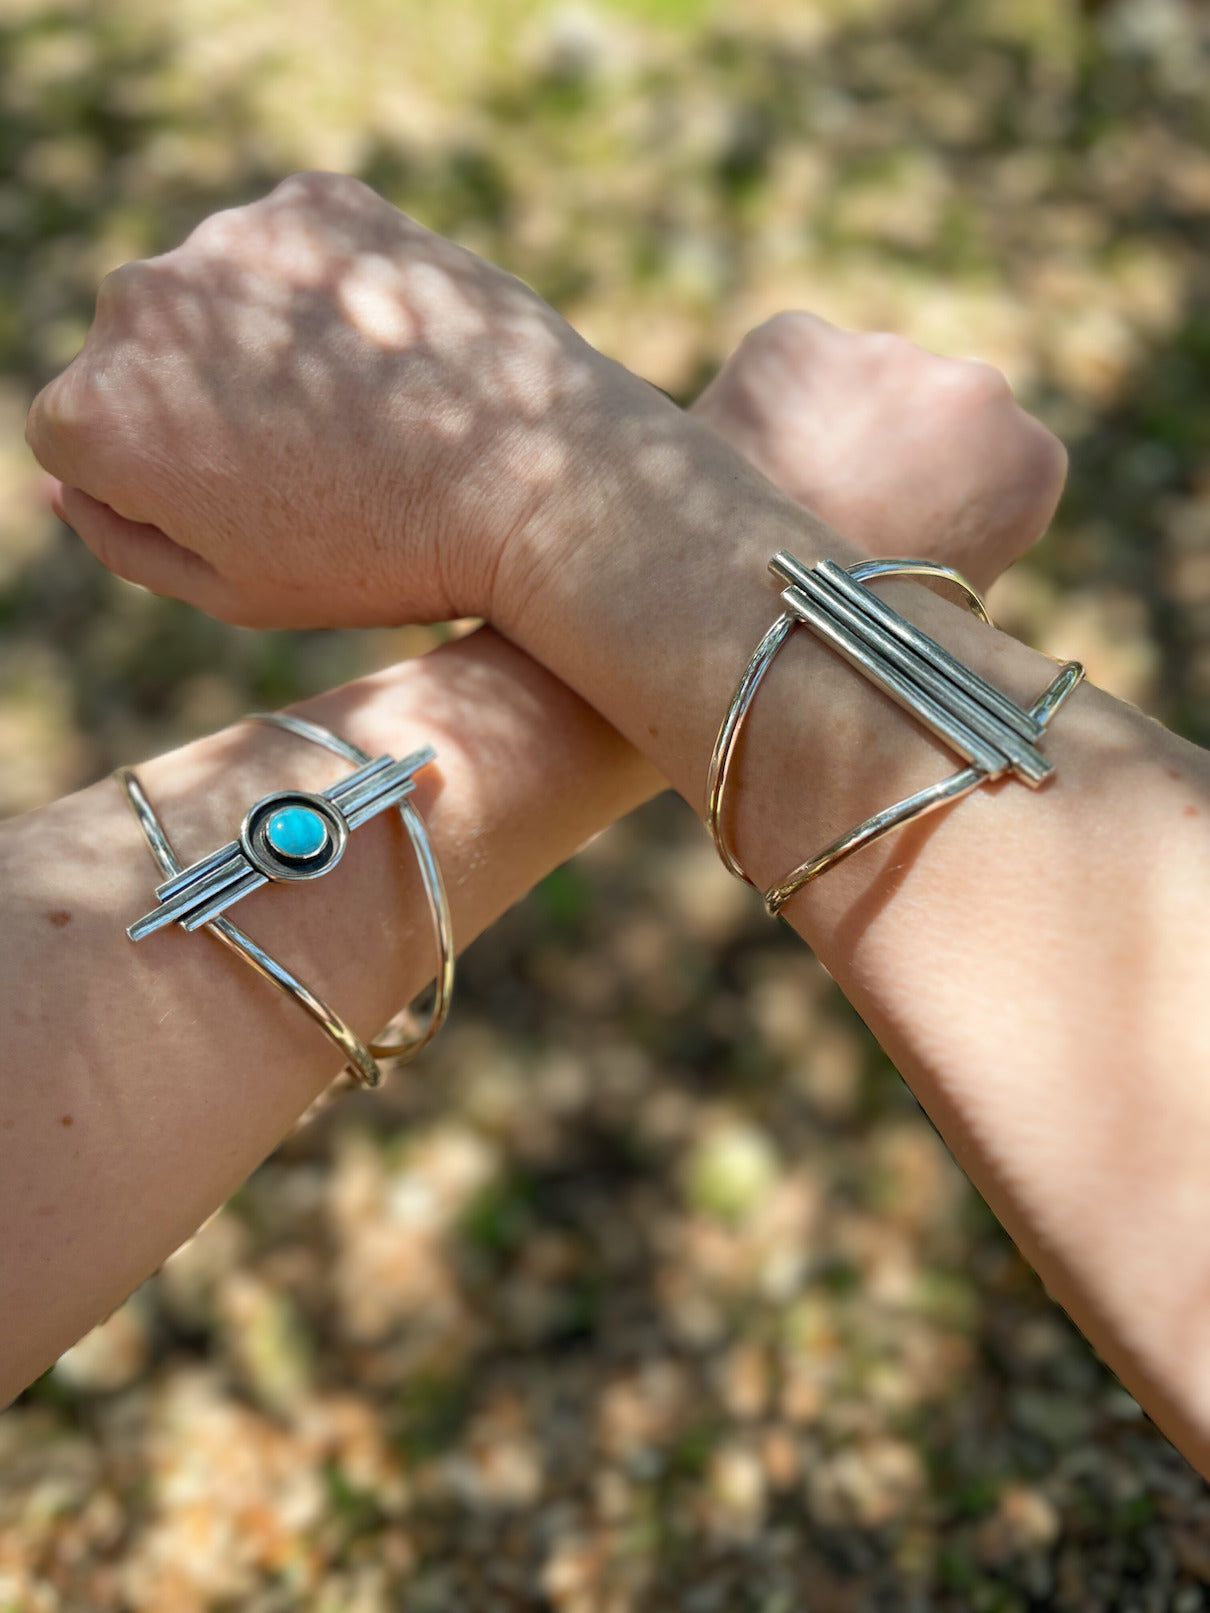 Two Art Deco inspired sterling silver cuff bracelets worn on crossed wrists outdoors in natural light. One features a small round turquoise stone in the center.